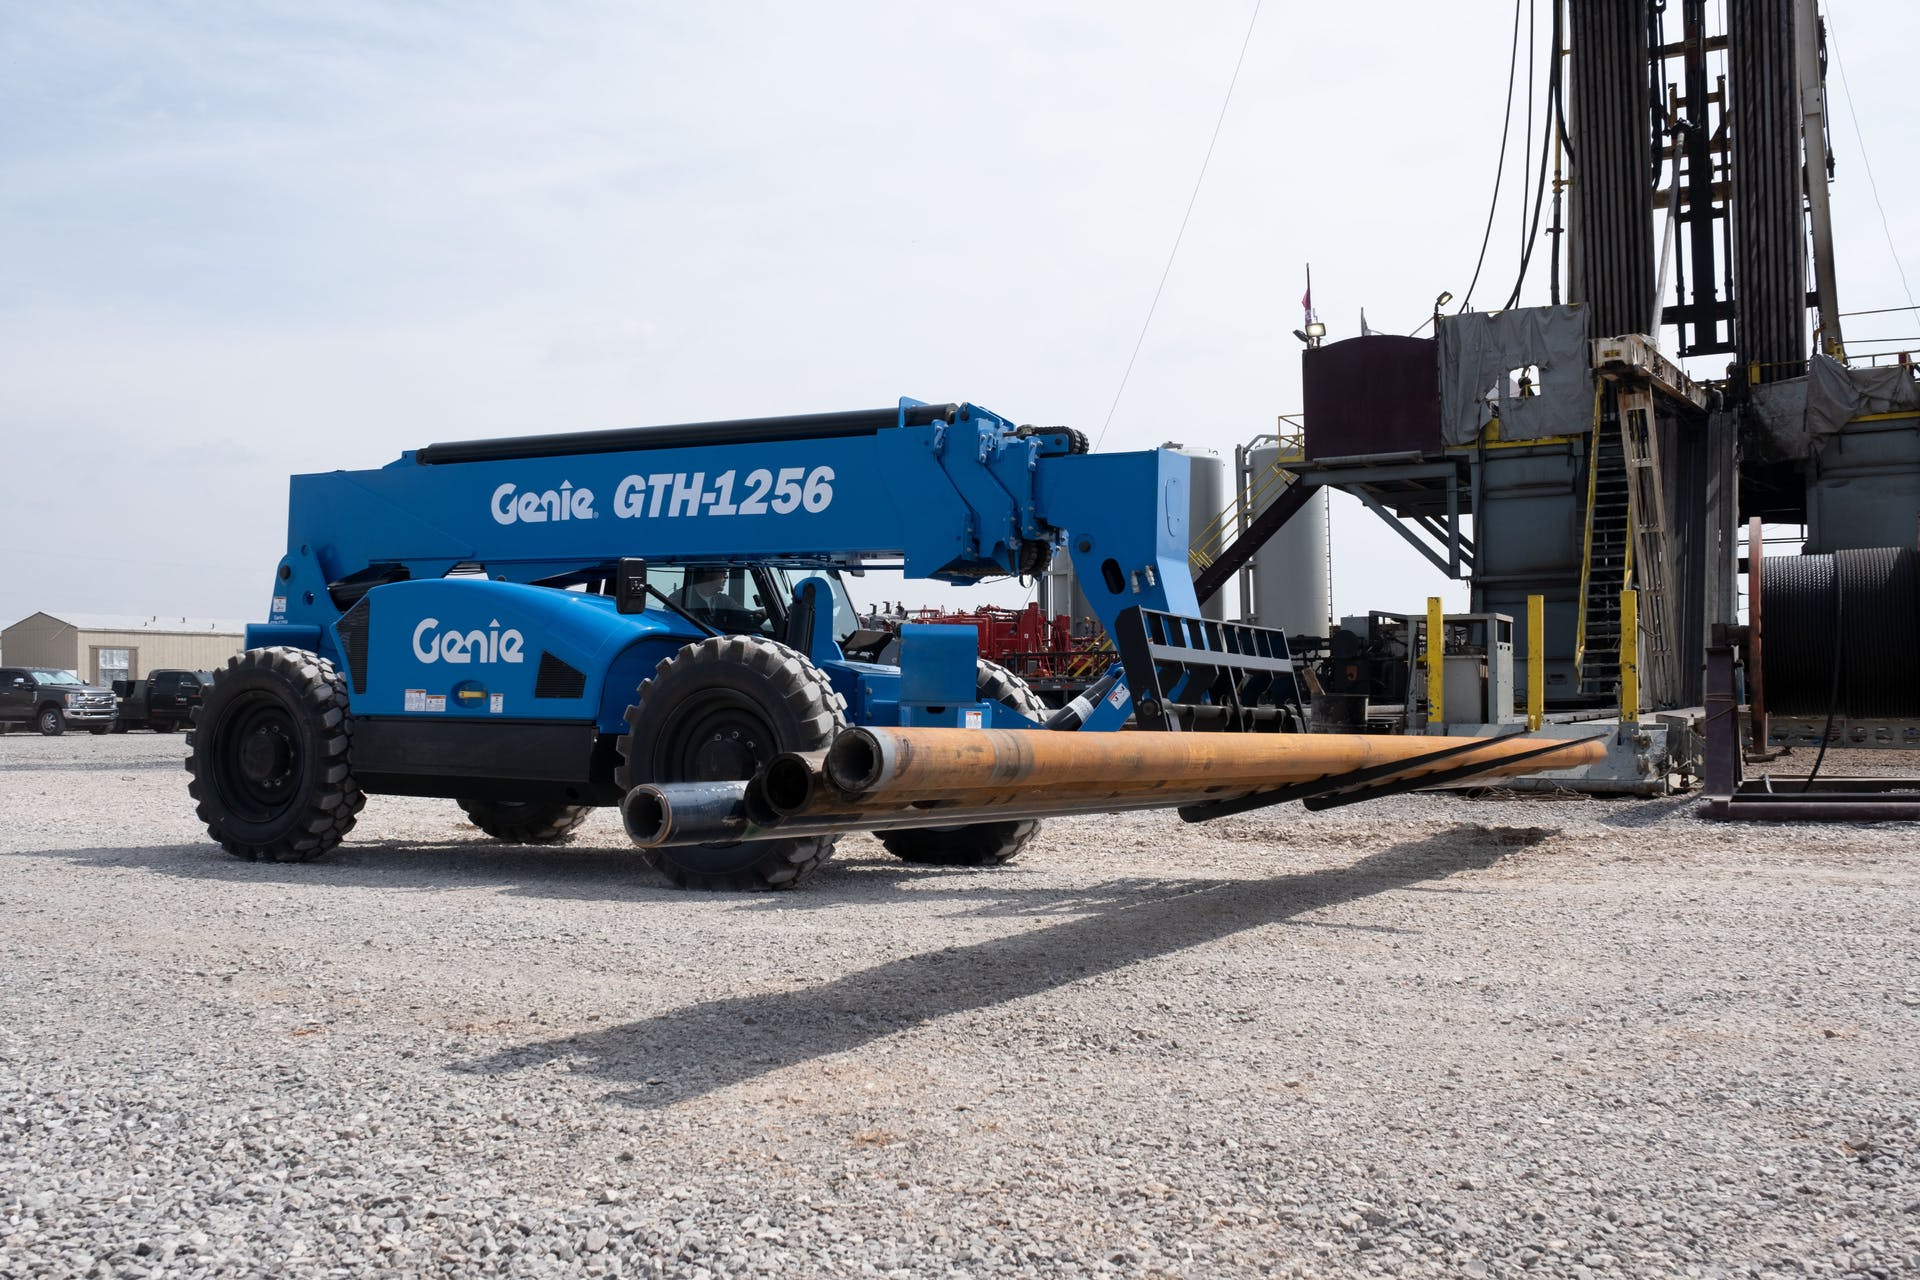 Genie GTH-1256 with black wheels carrying load